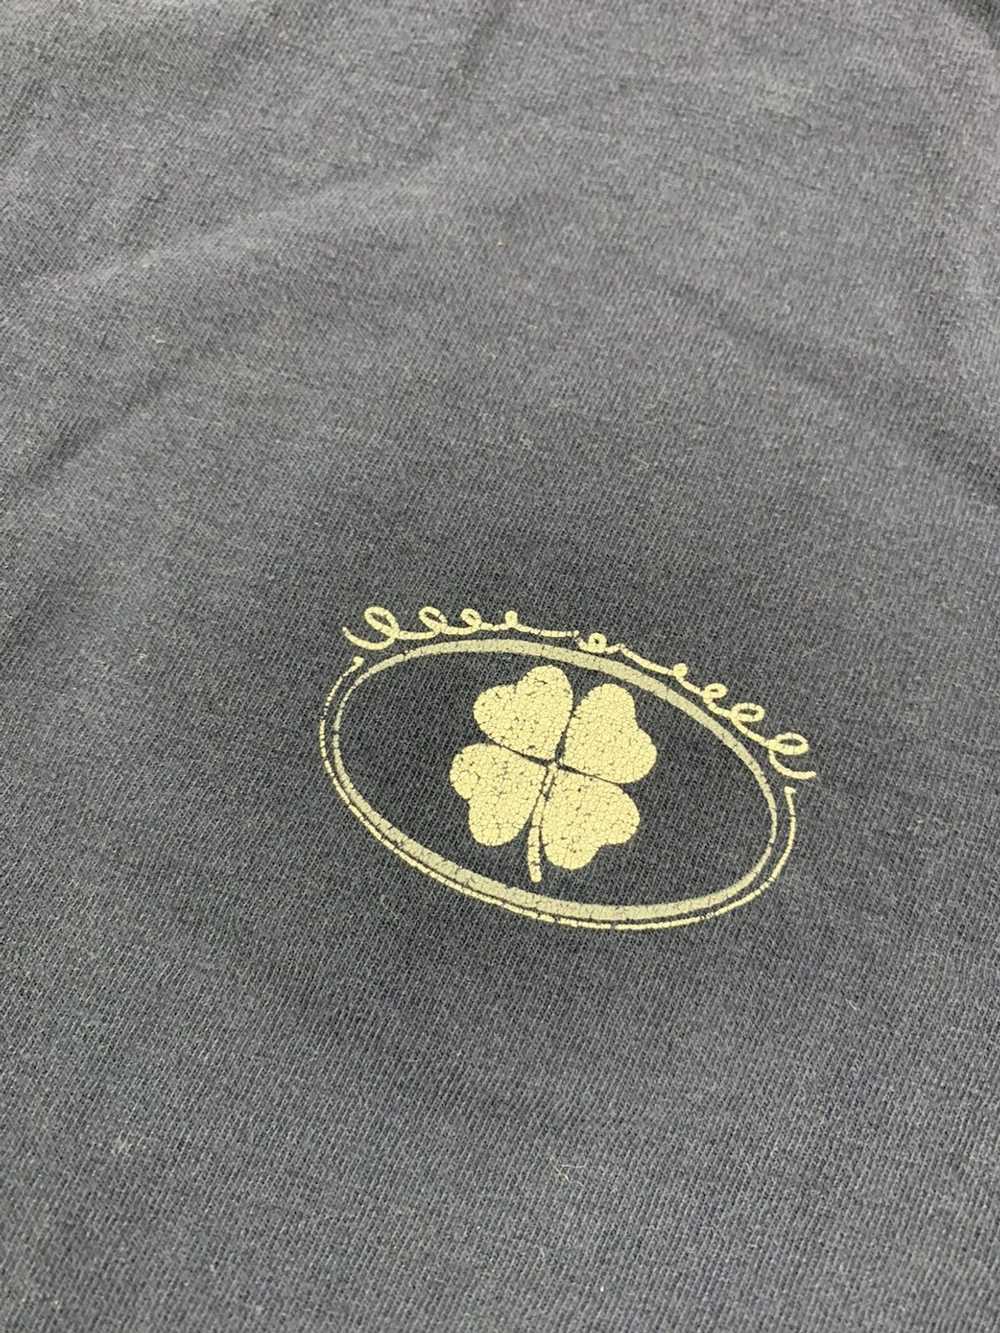 Vintage Vintage 1990s Lucky Brand T-Shirt - image 4